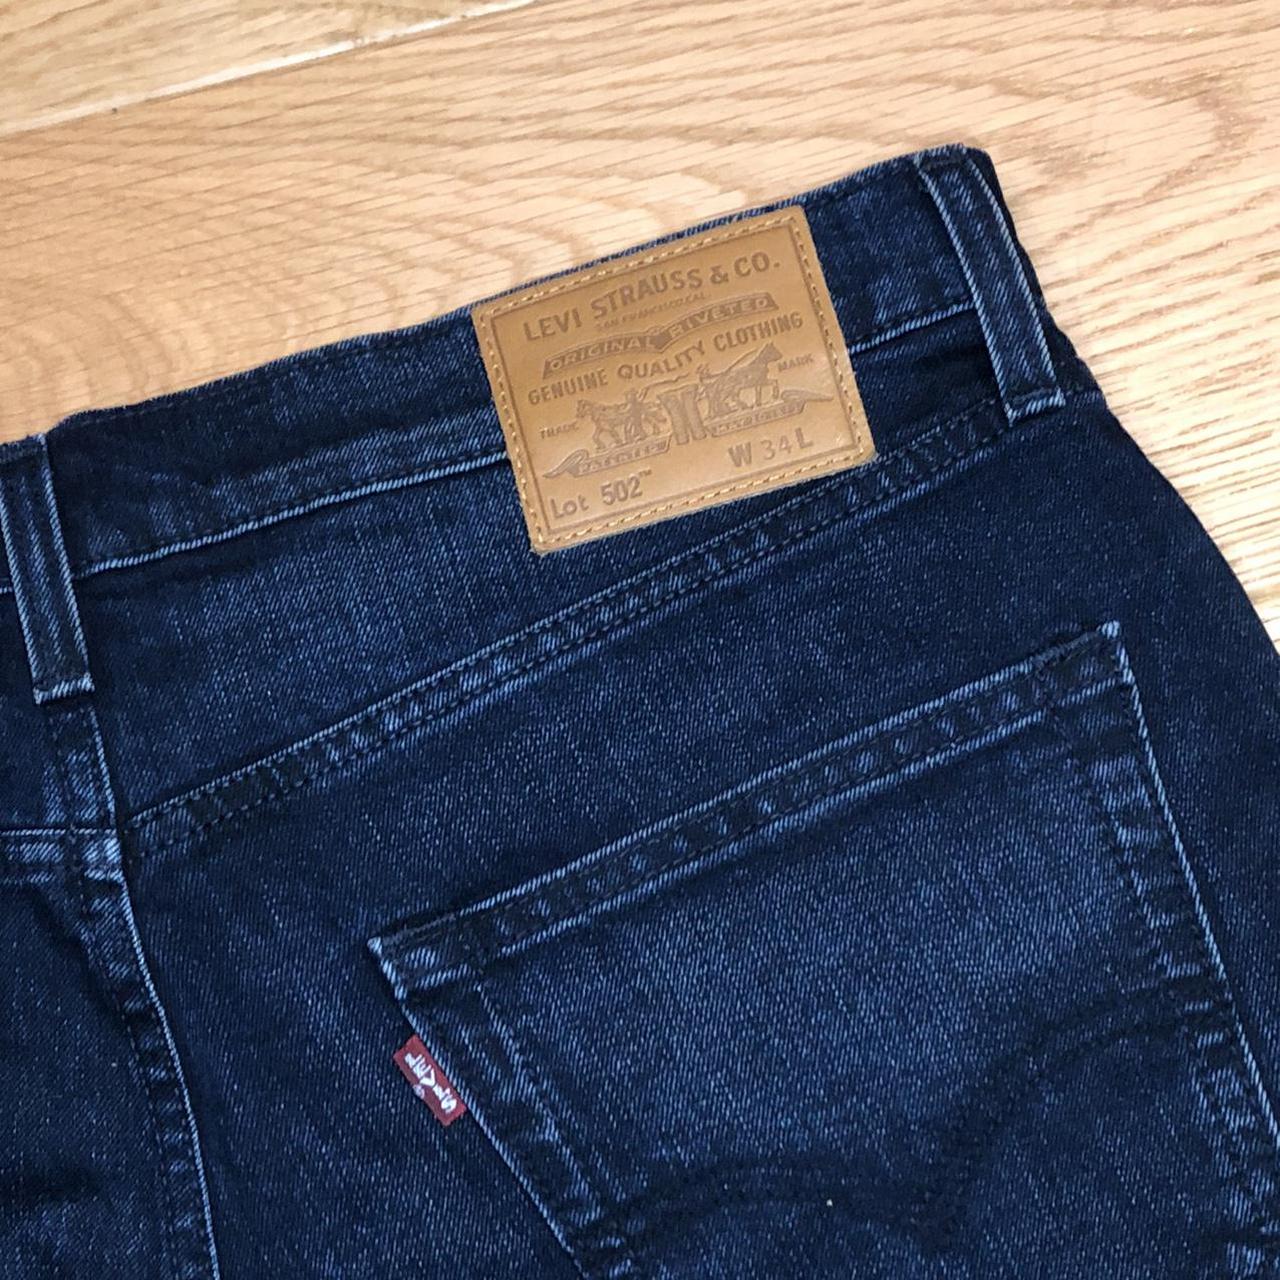 Levi's Men's Navy and Blue Shorts (2)